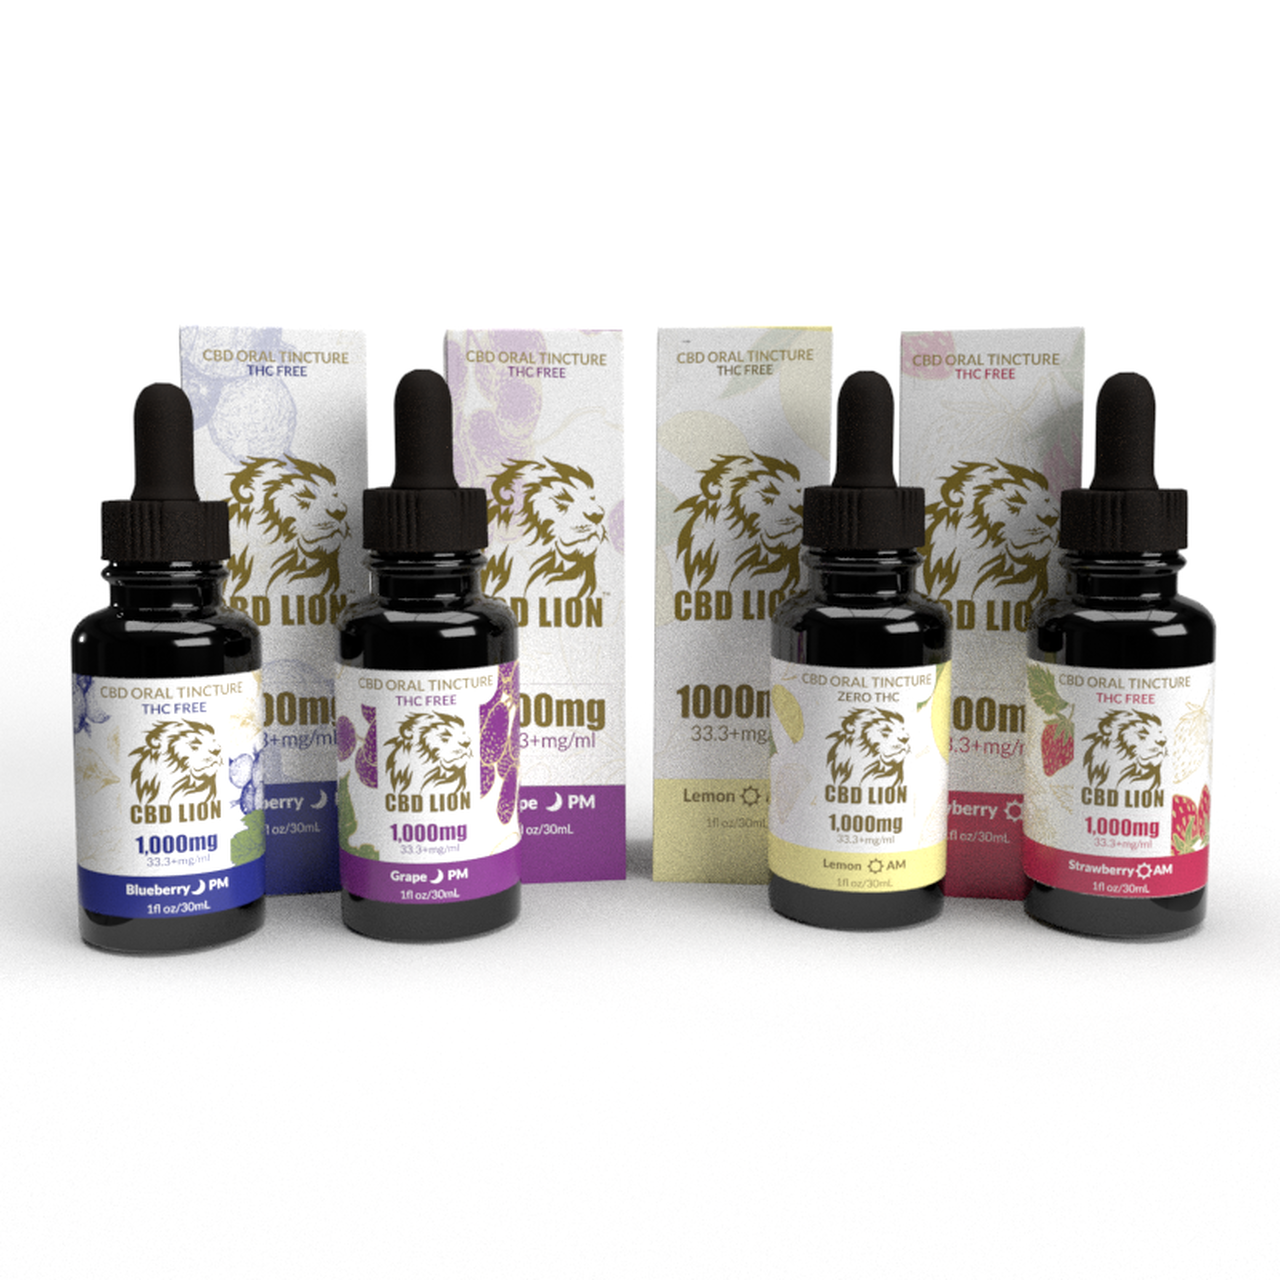 1000mg-flavoredtinctures-withboxes-all-web-lowres-29854.1578693514.png